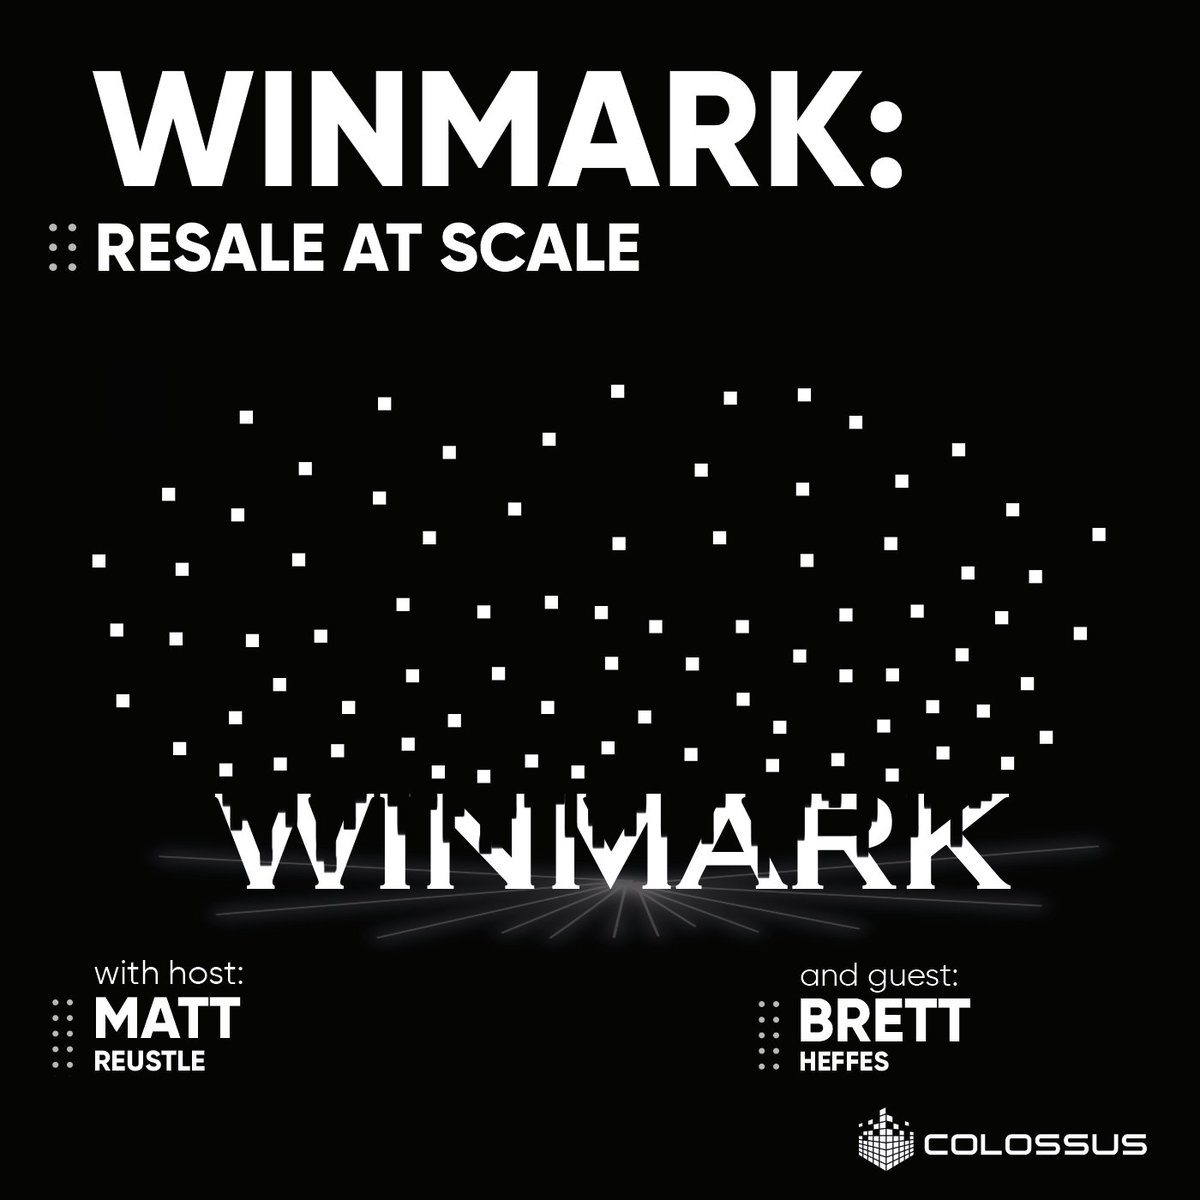 On the latest podcast episode of @bizbreakdowns, @BrettHeffes sits down with @ReustleMatt to discuss Winmark, our franchise model, the scale of resale, and our role as leaders in sustainability. Listen here: joincolossus.com/episodes/43763…. #WinmarkResale #Podcasting #ResaleRetail